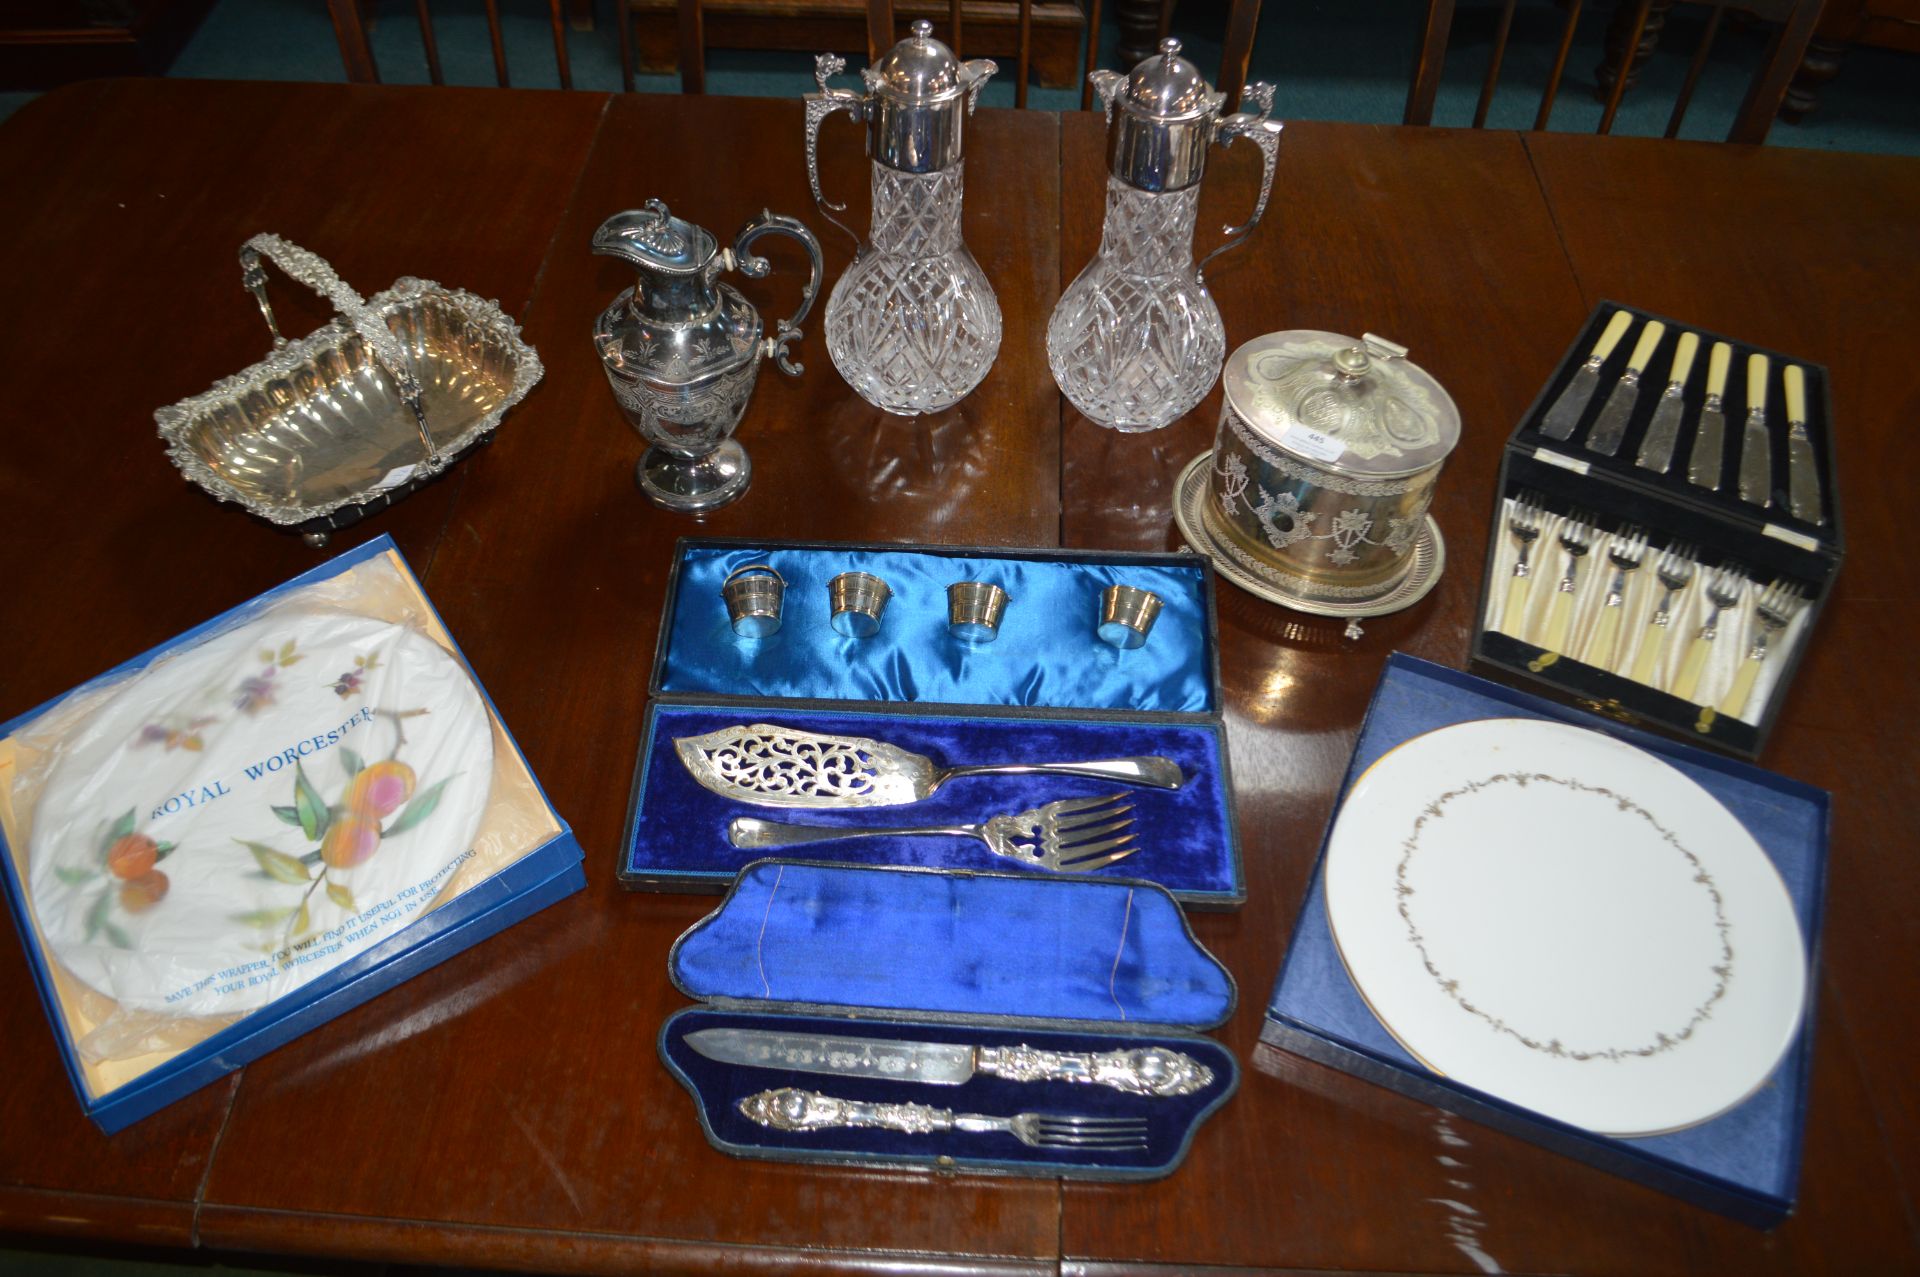 EPNS Cutlery Sets, Crystal Decanters, and Royal Wo